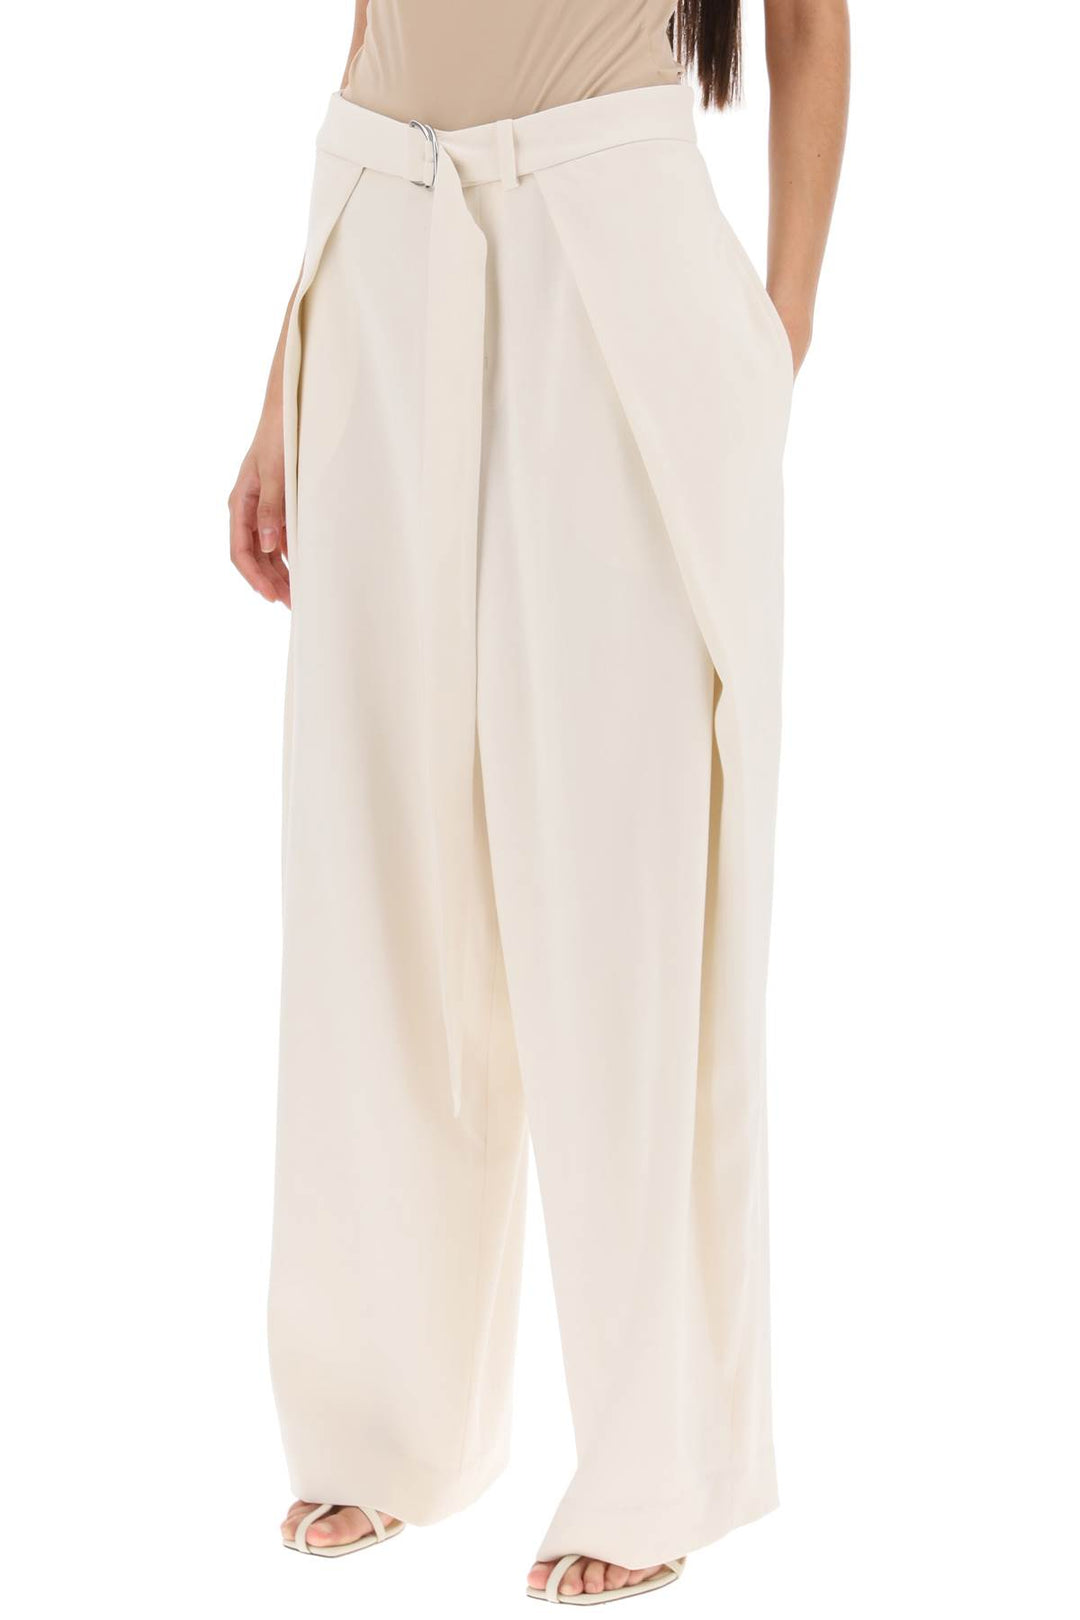 Ami Alexandre Matiussi Wide Fit Pants With Floating Panels   White